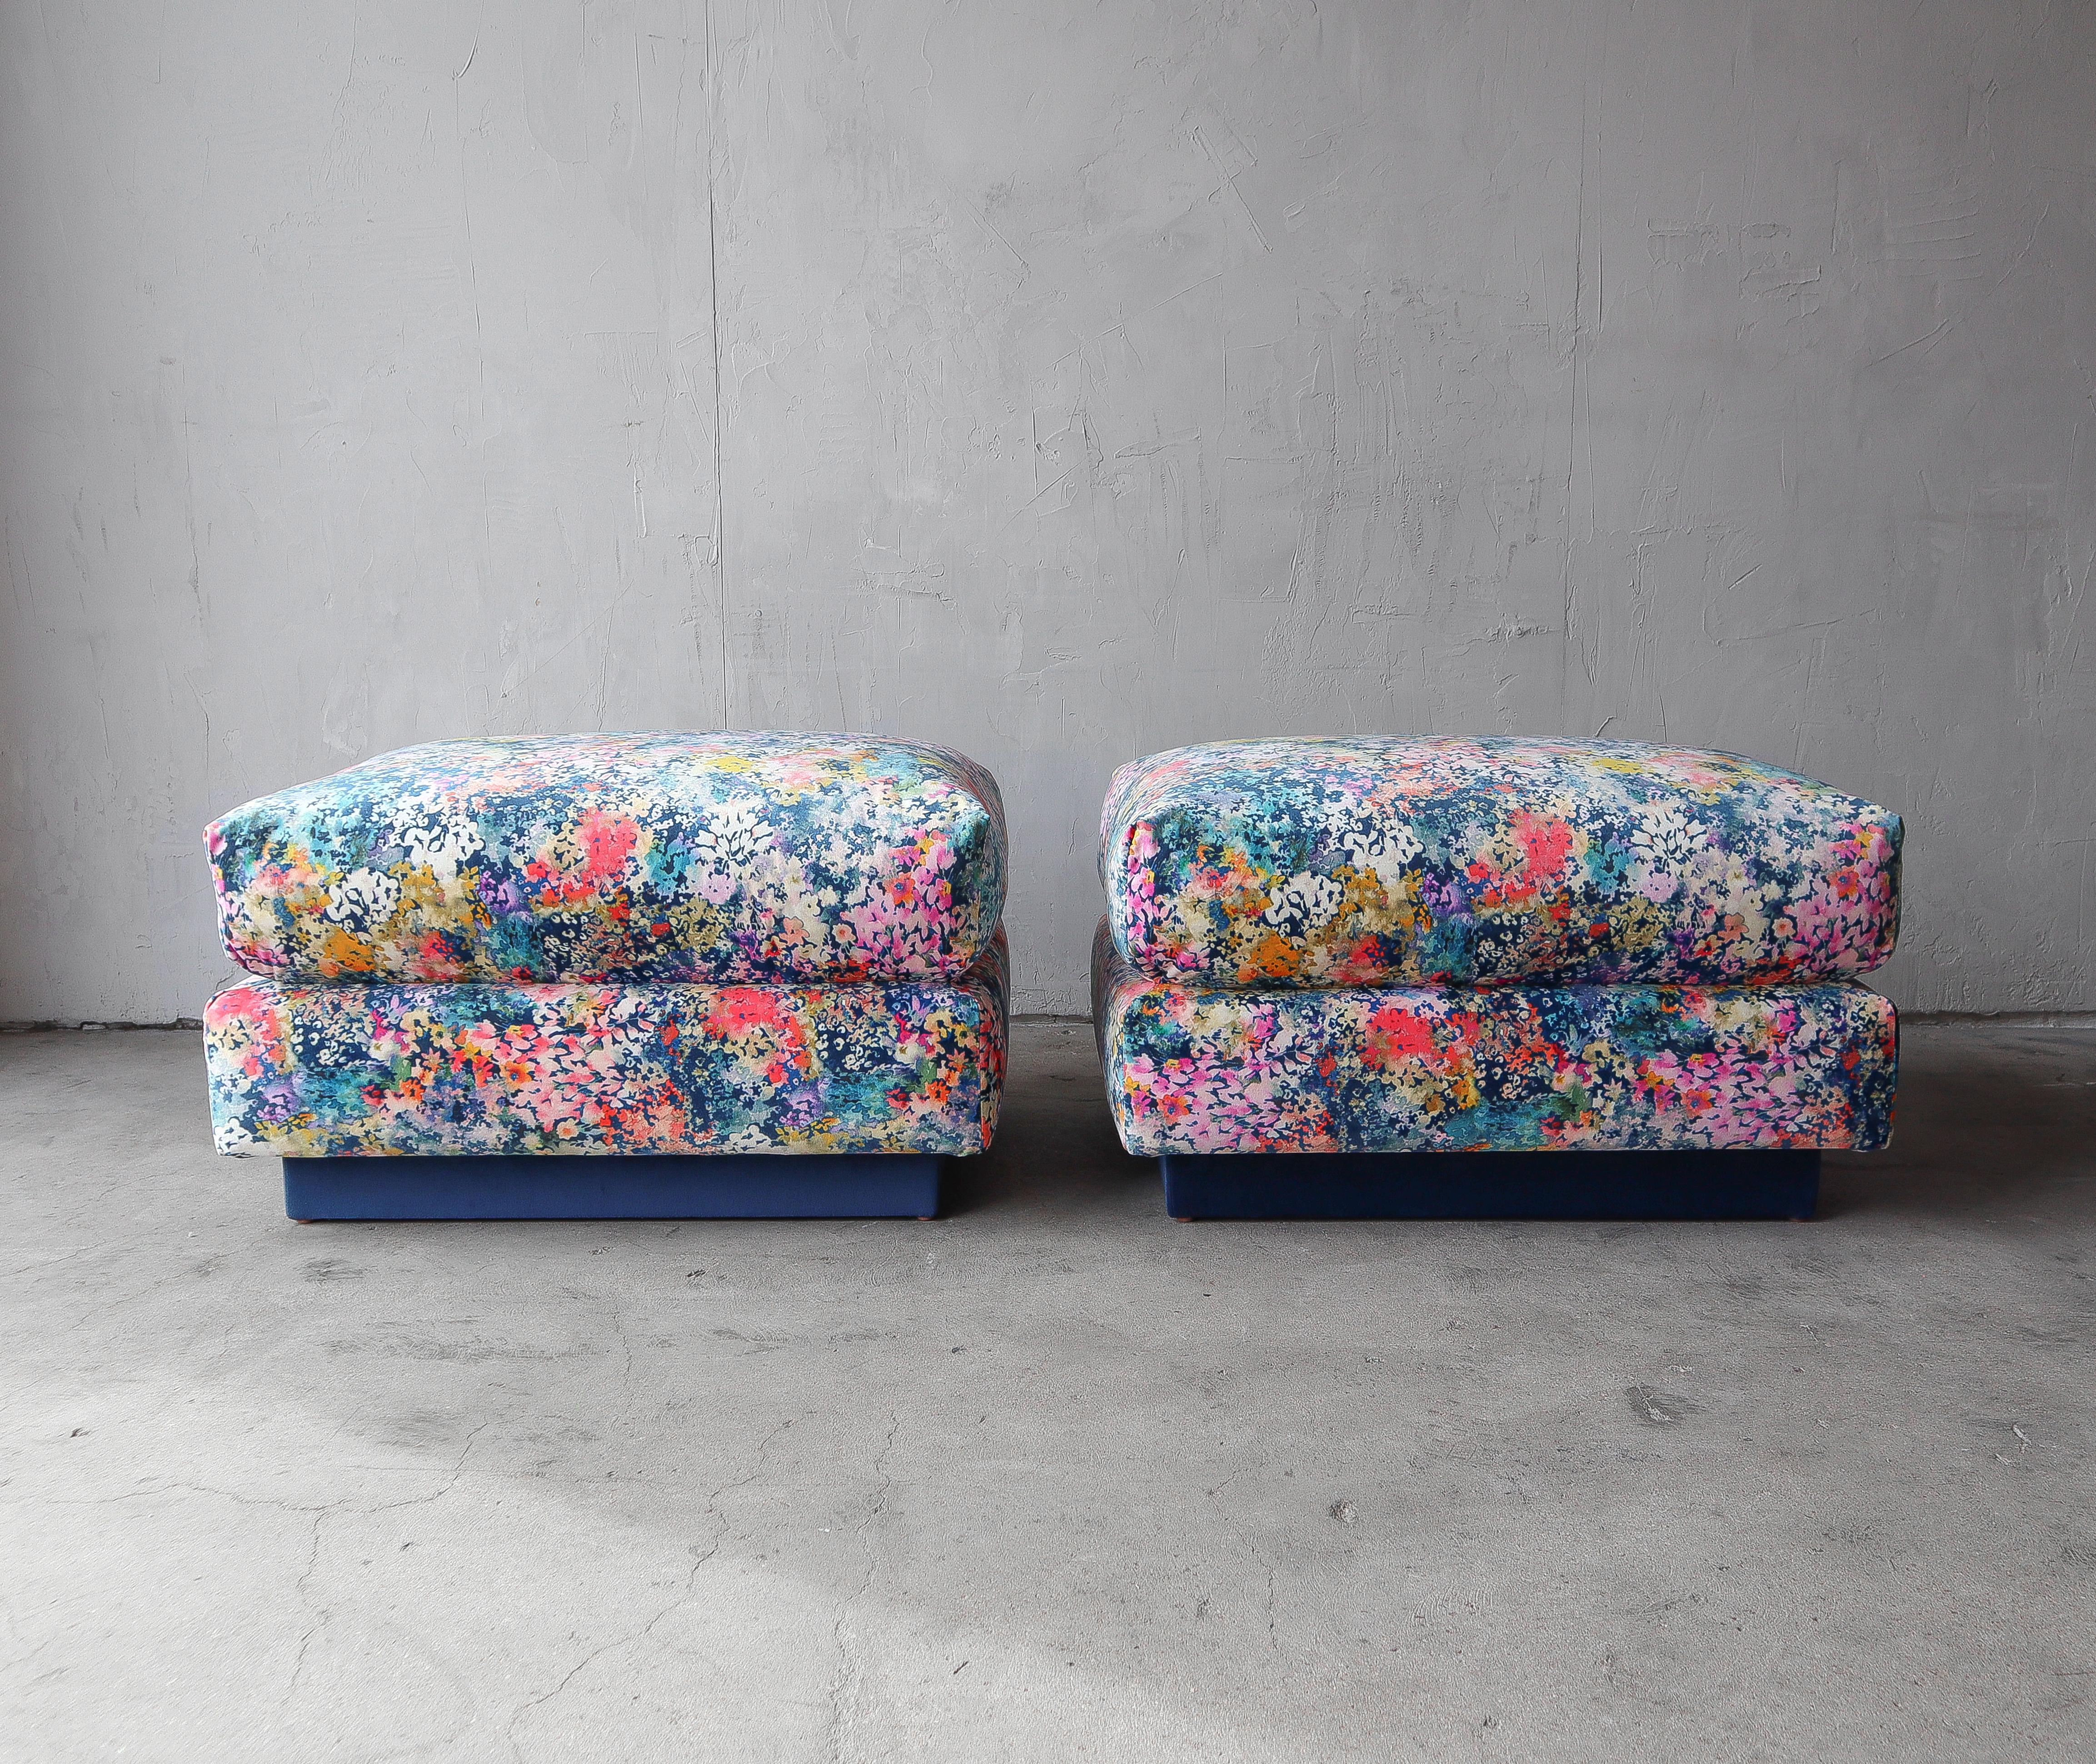 Great pair of oversized, rectangular ottomans. Use them as stylish decor that doubles as extra seating.

The ottomans have been reupholstered with all new foam and and gorgeous floral microvelvet fabric.